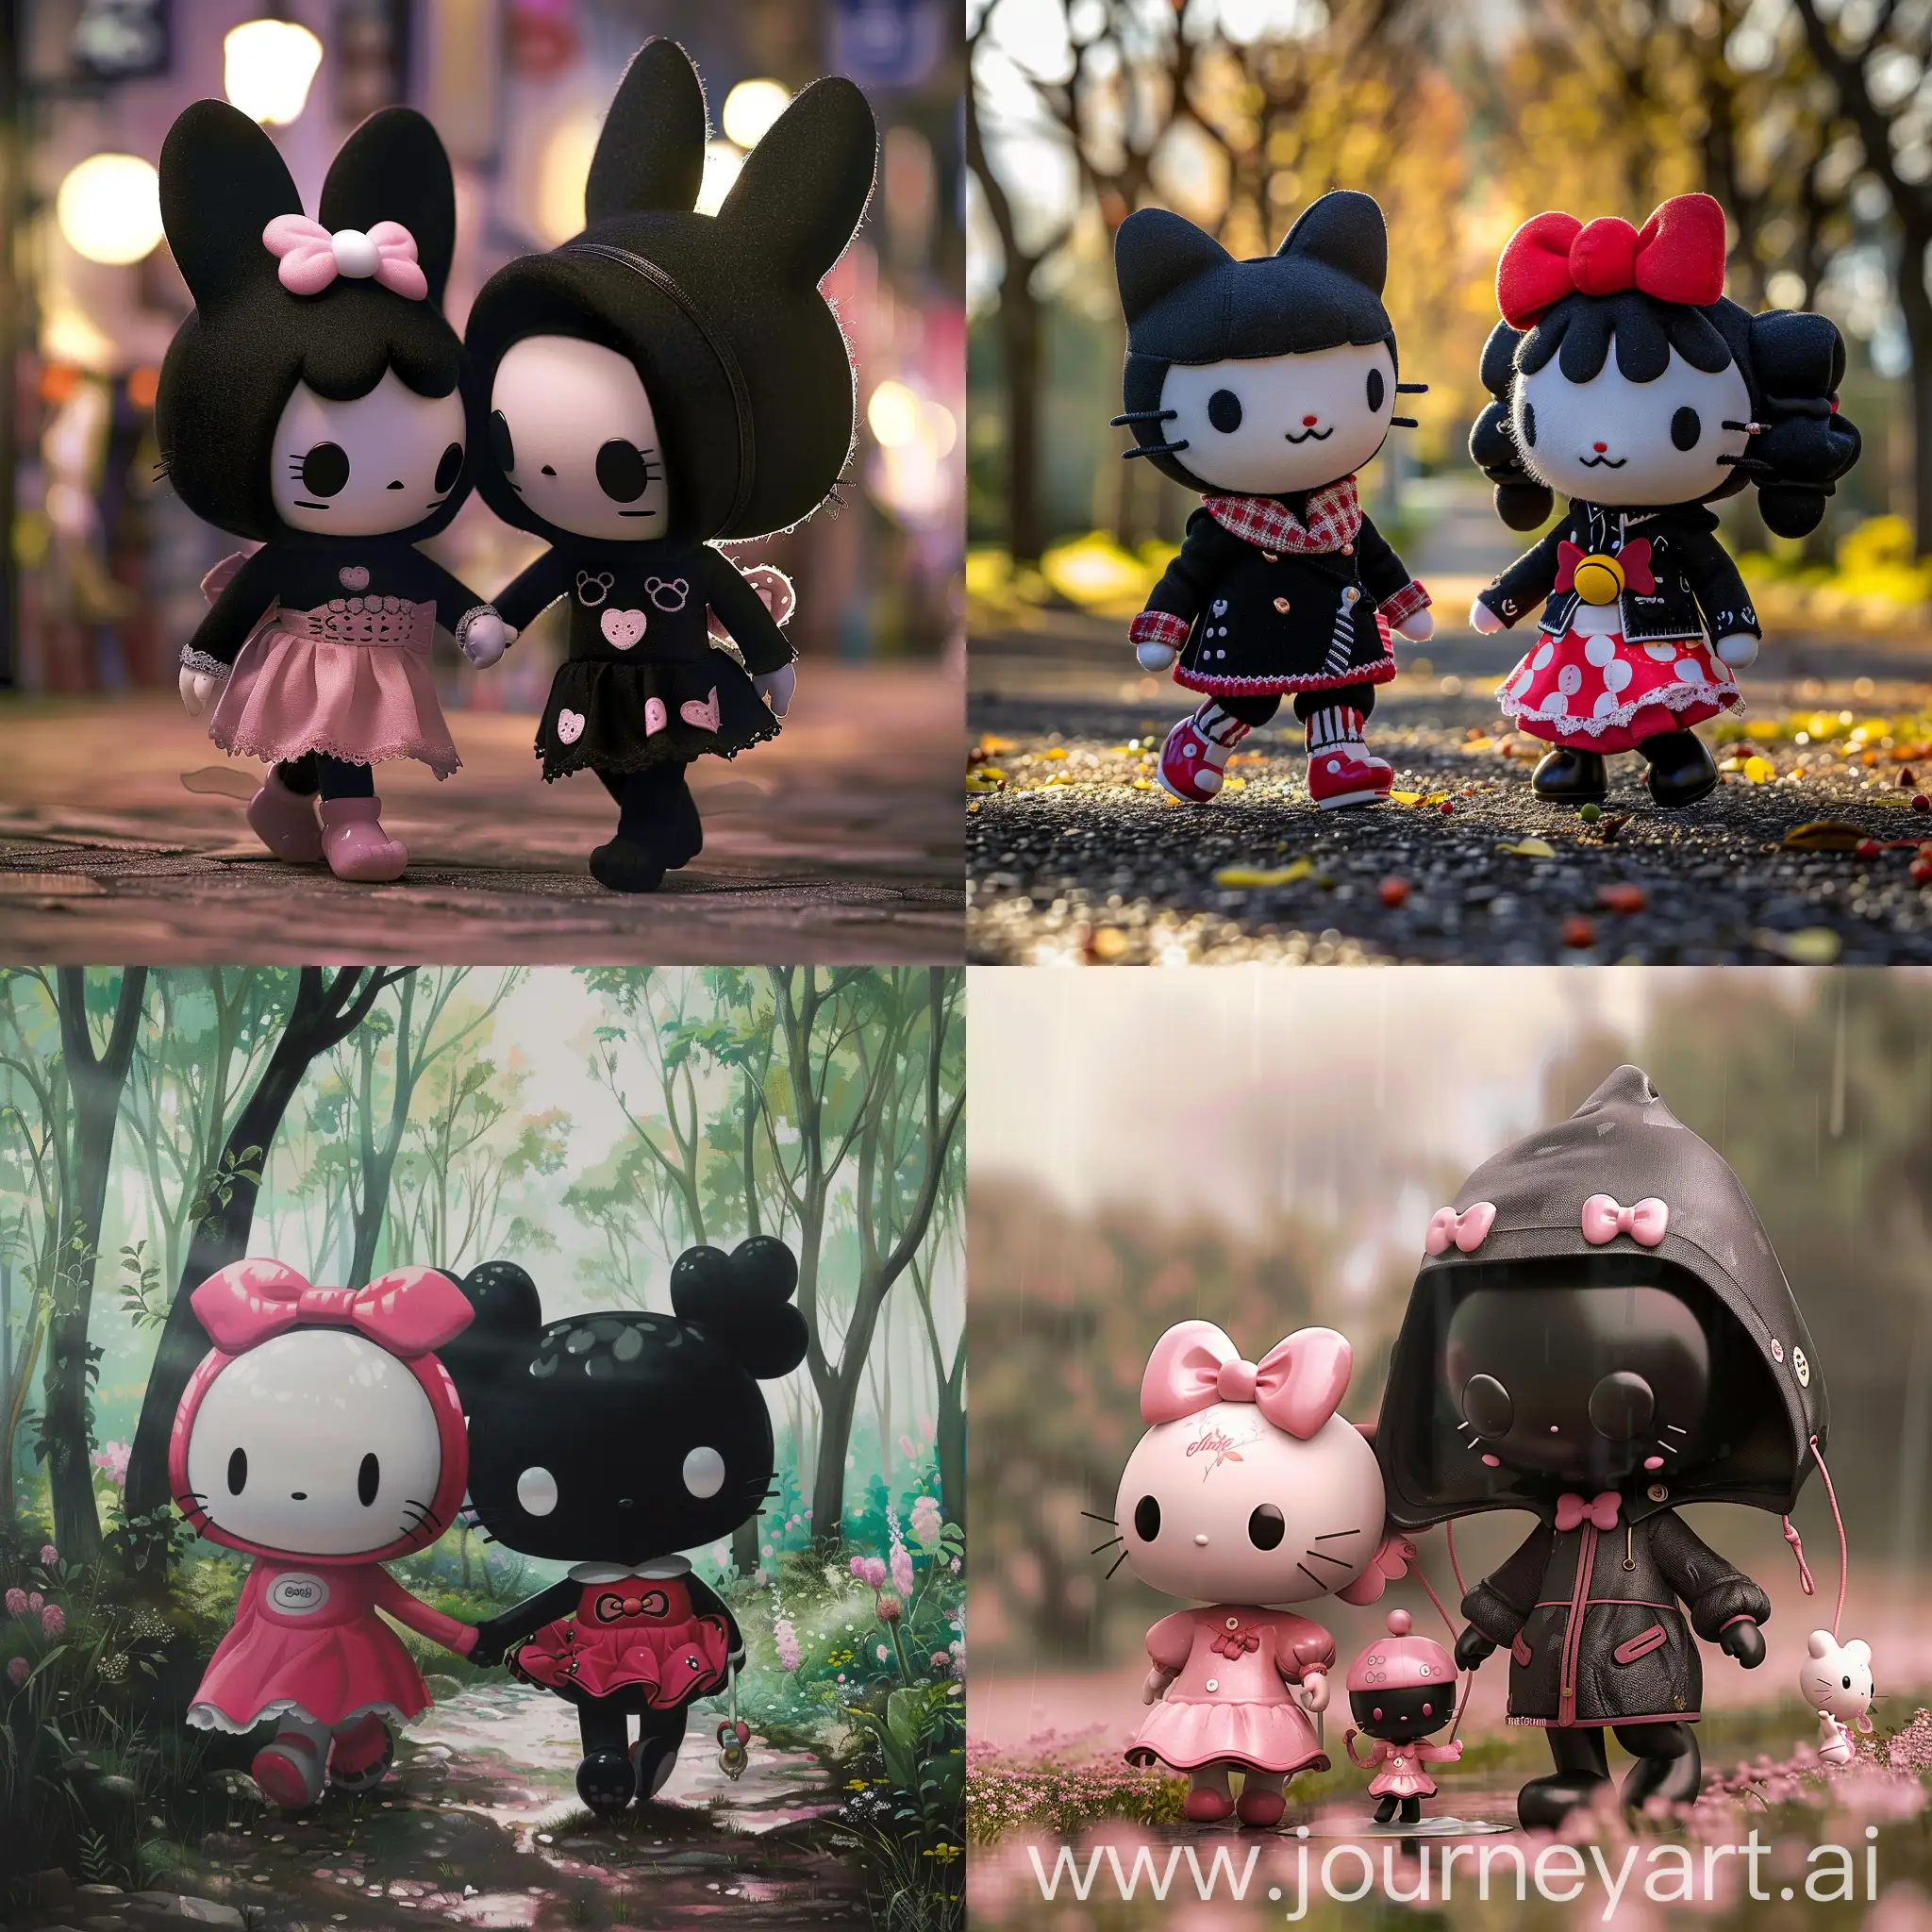 Sanrio-Hello-Kitty-and-Kuromi-Walking-Together-in-a-Vibrant-Scene